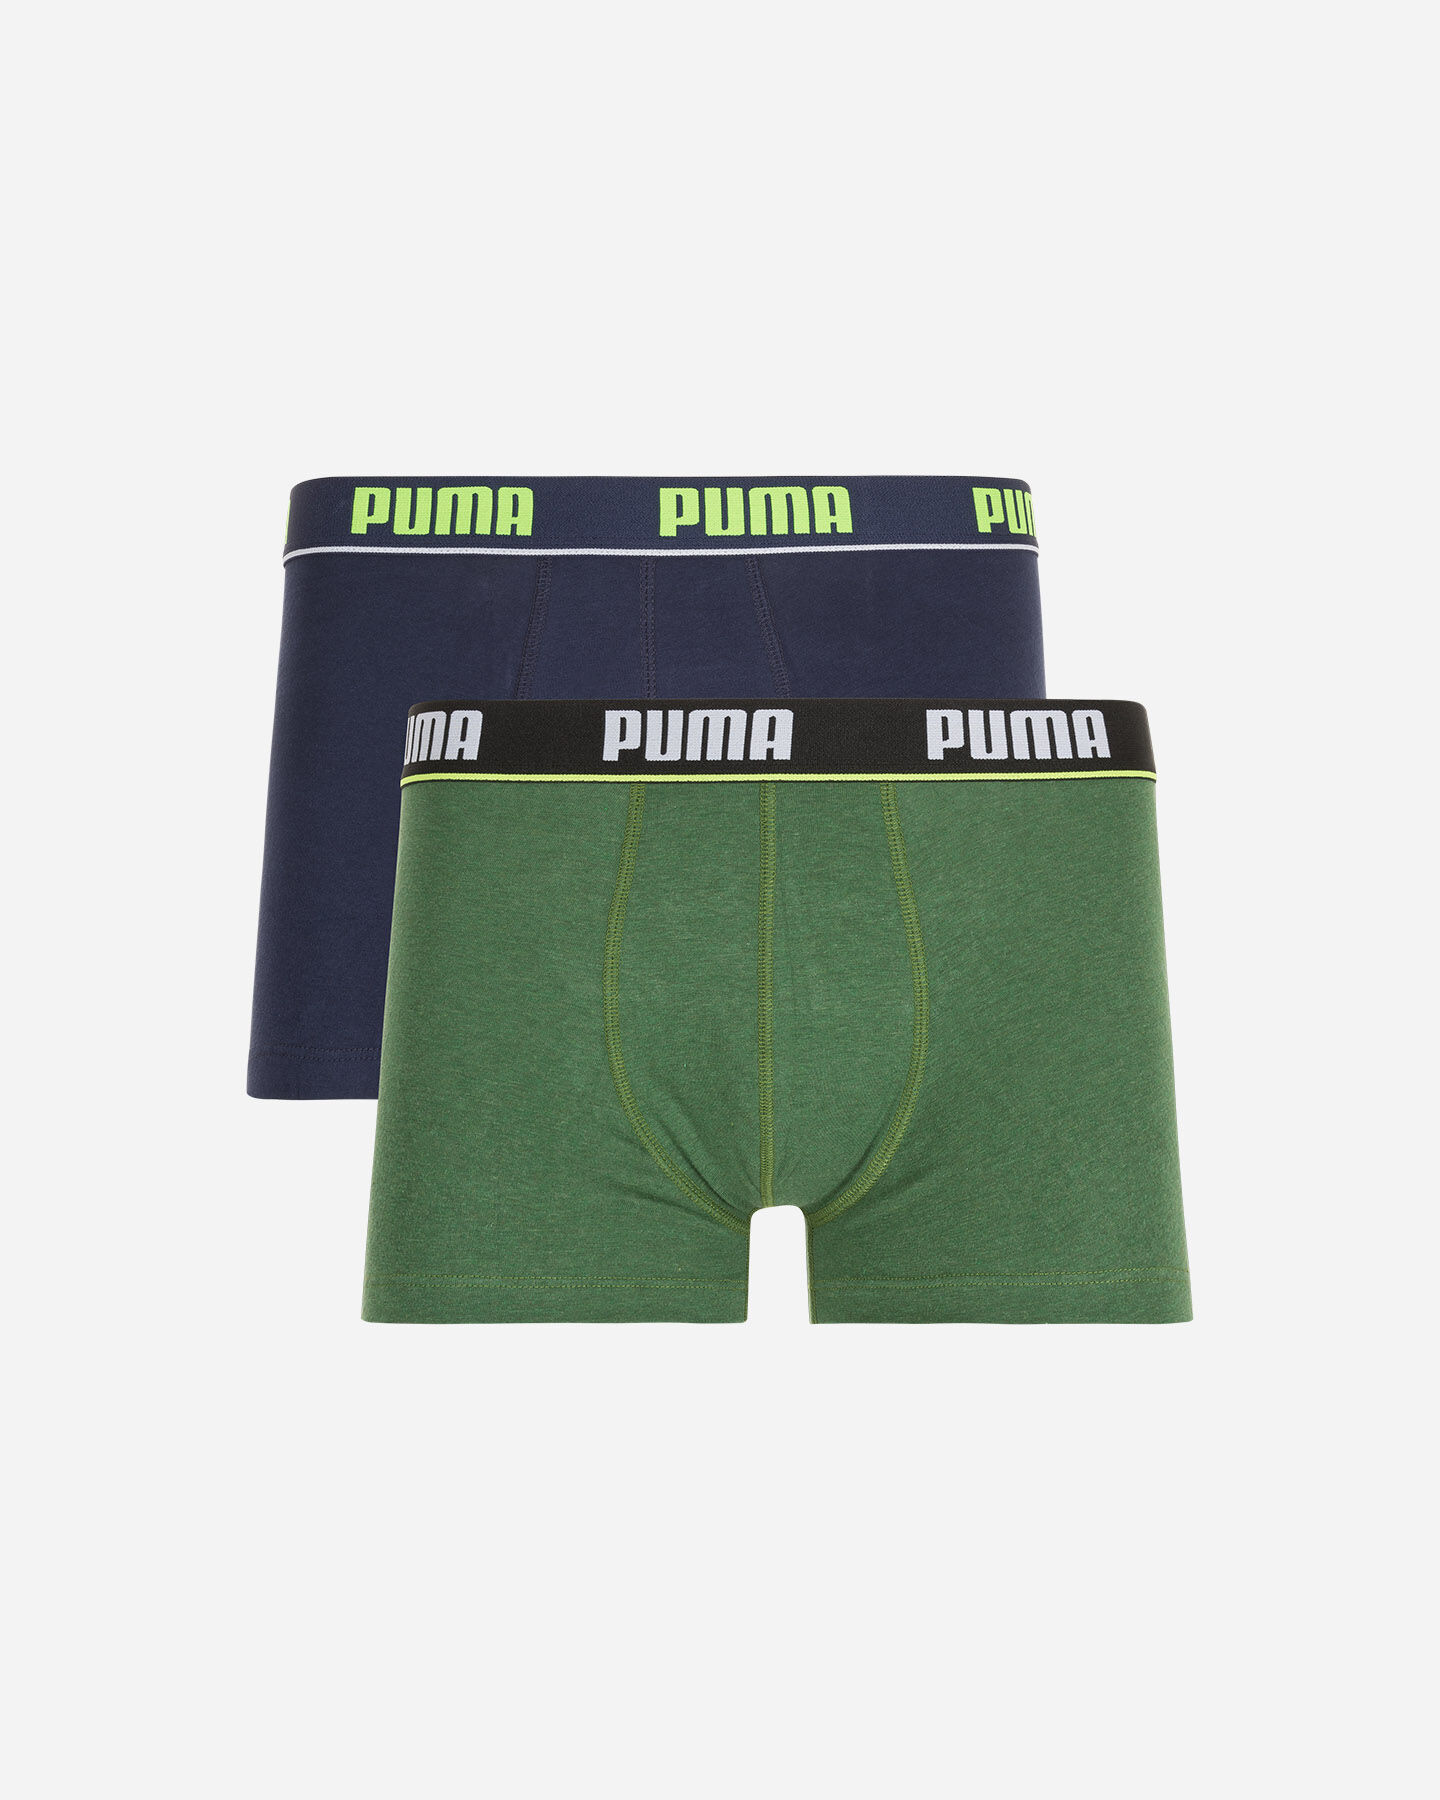  Intimo PUMA 2 PACK BOXER SHORT M S4076470|439|030 scatto 0